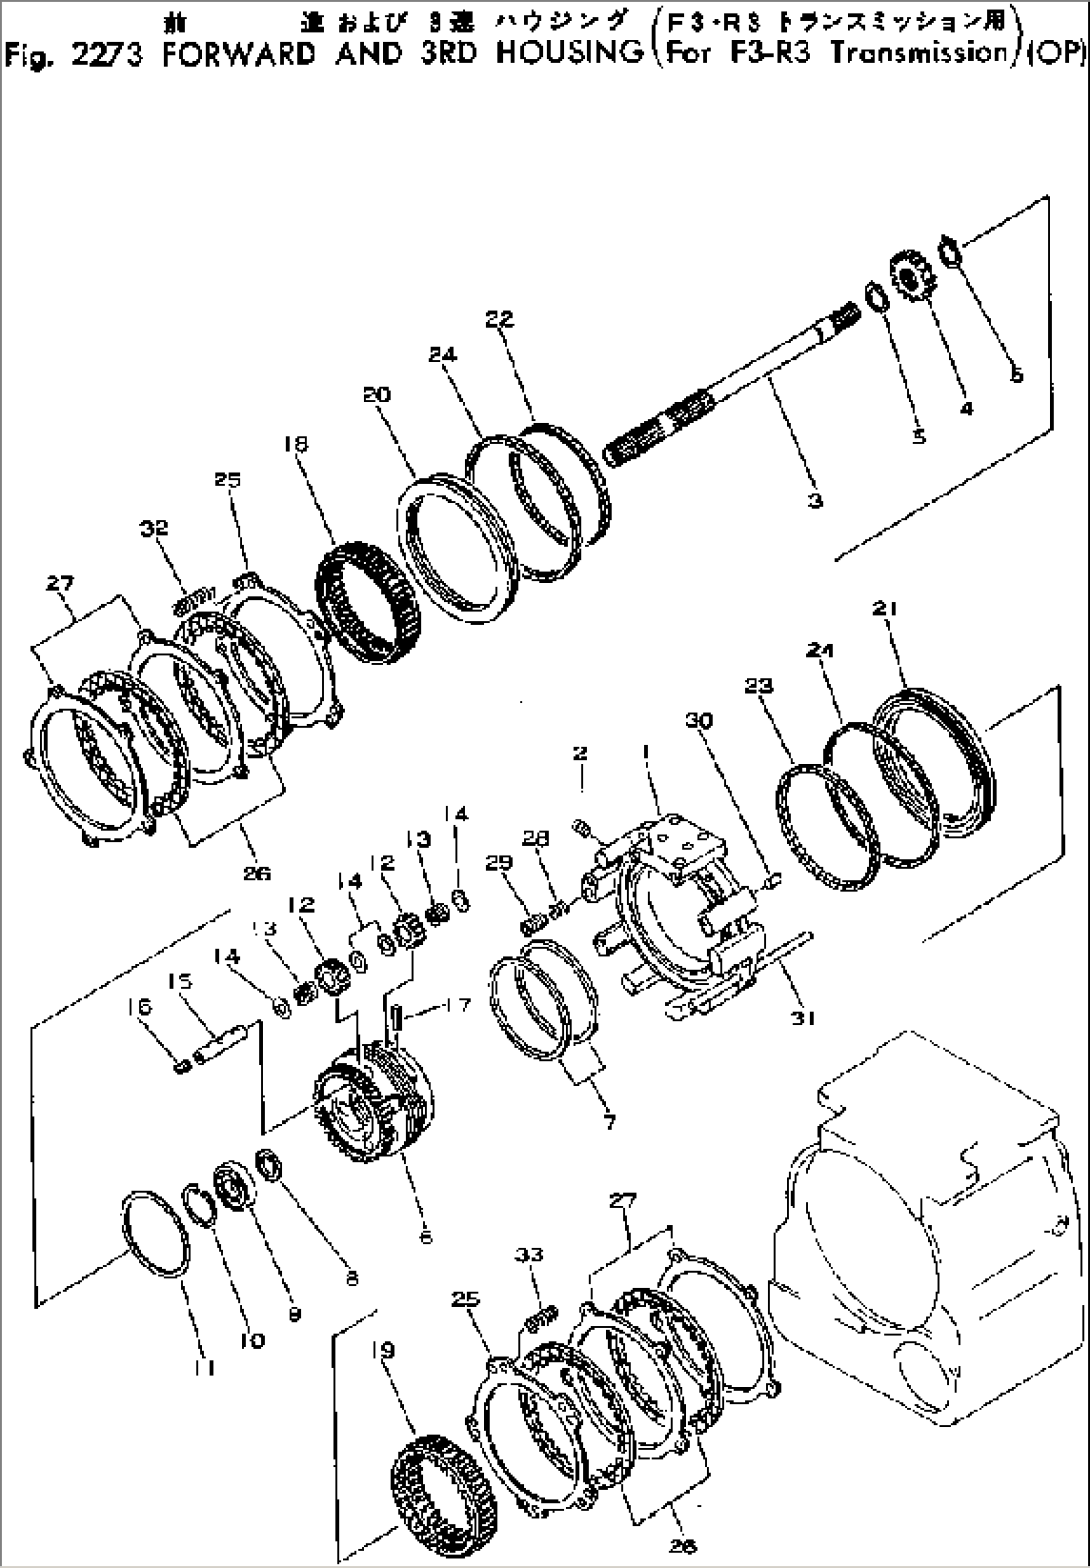 FORWARD AND 3RD HOUSING (FOR F3-R3 TRANSMISSION)